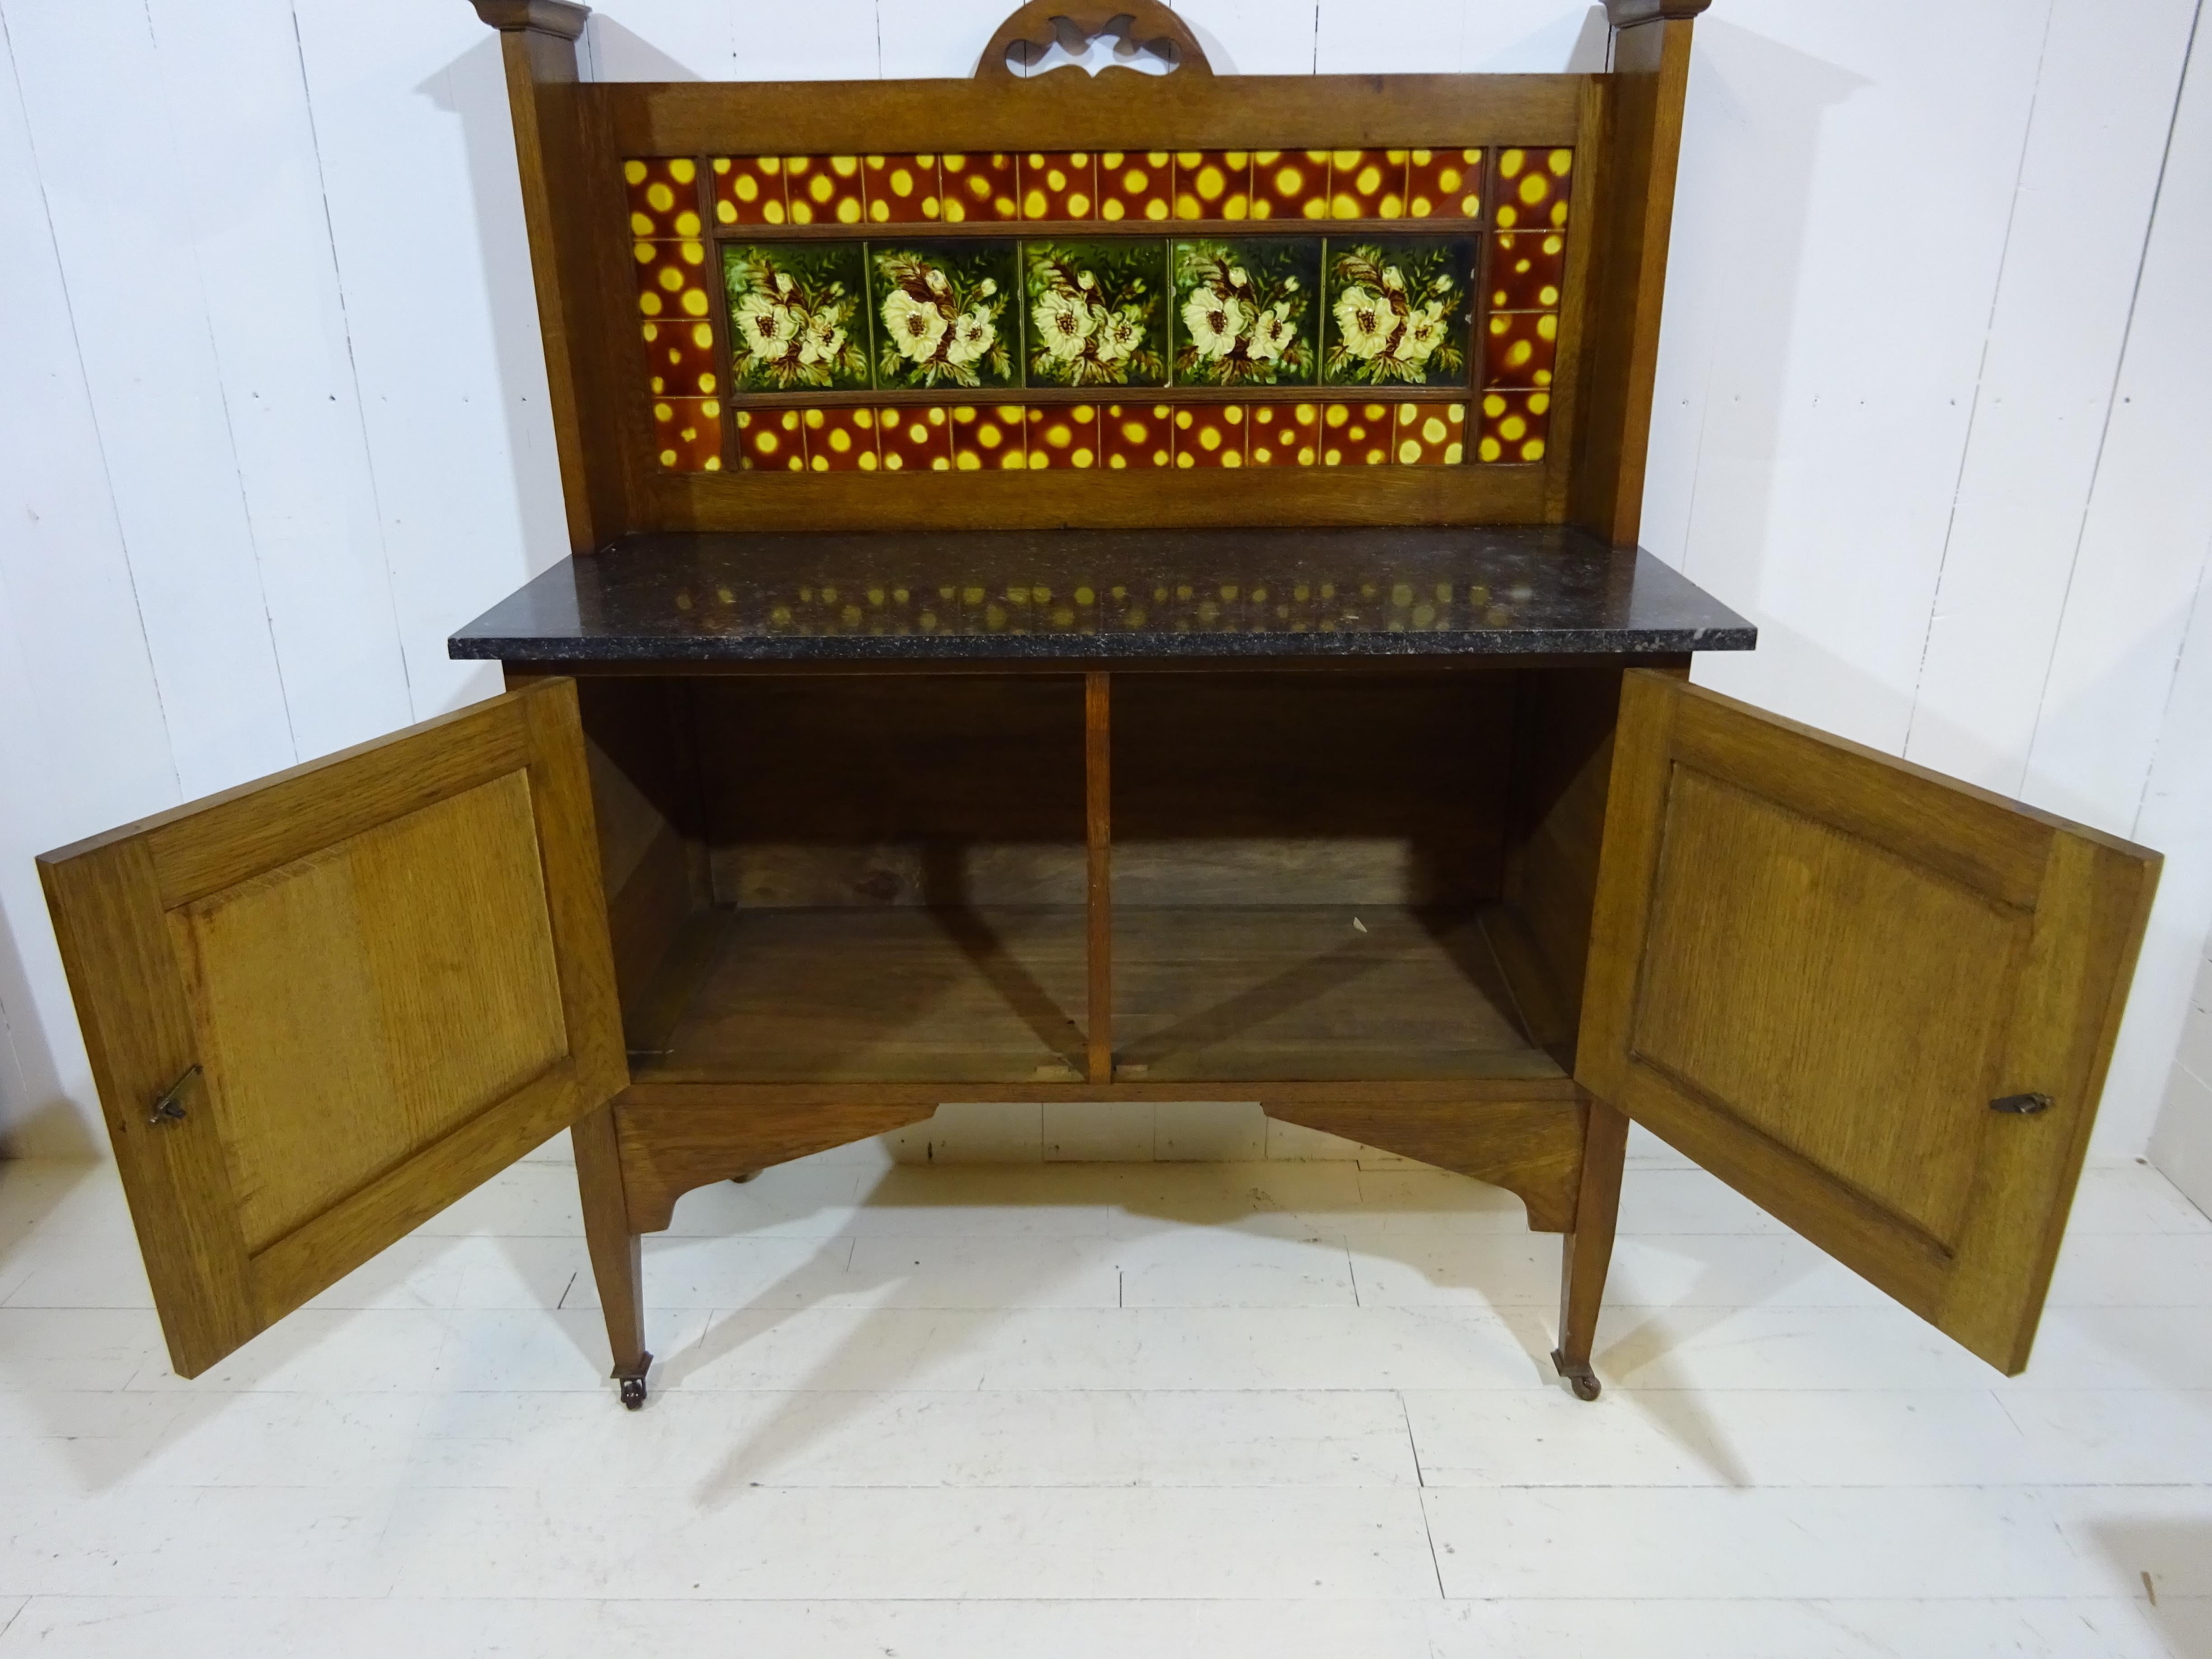 Victorian Marble Top Wash Stand in Oak with Floral Glazed Tiles 3